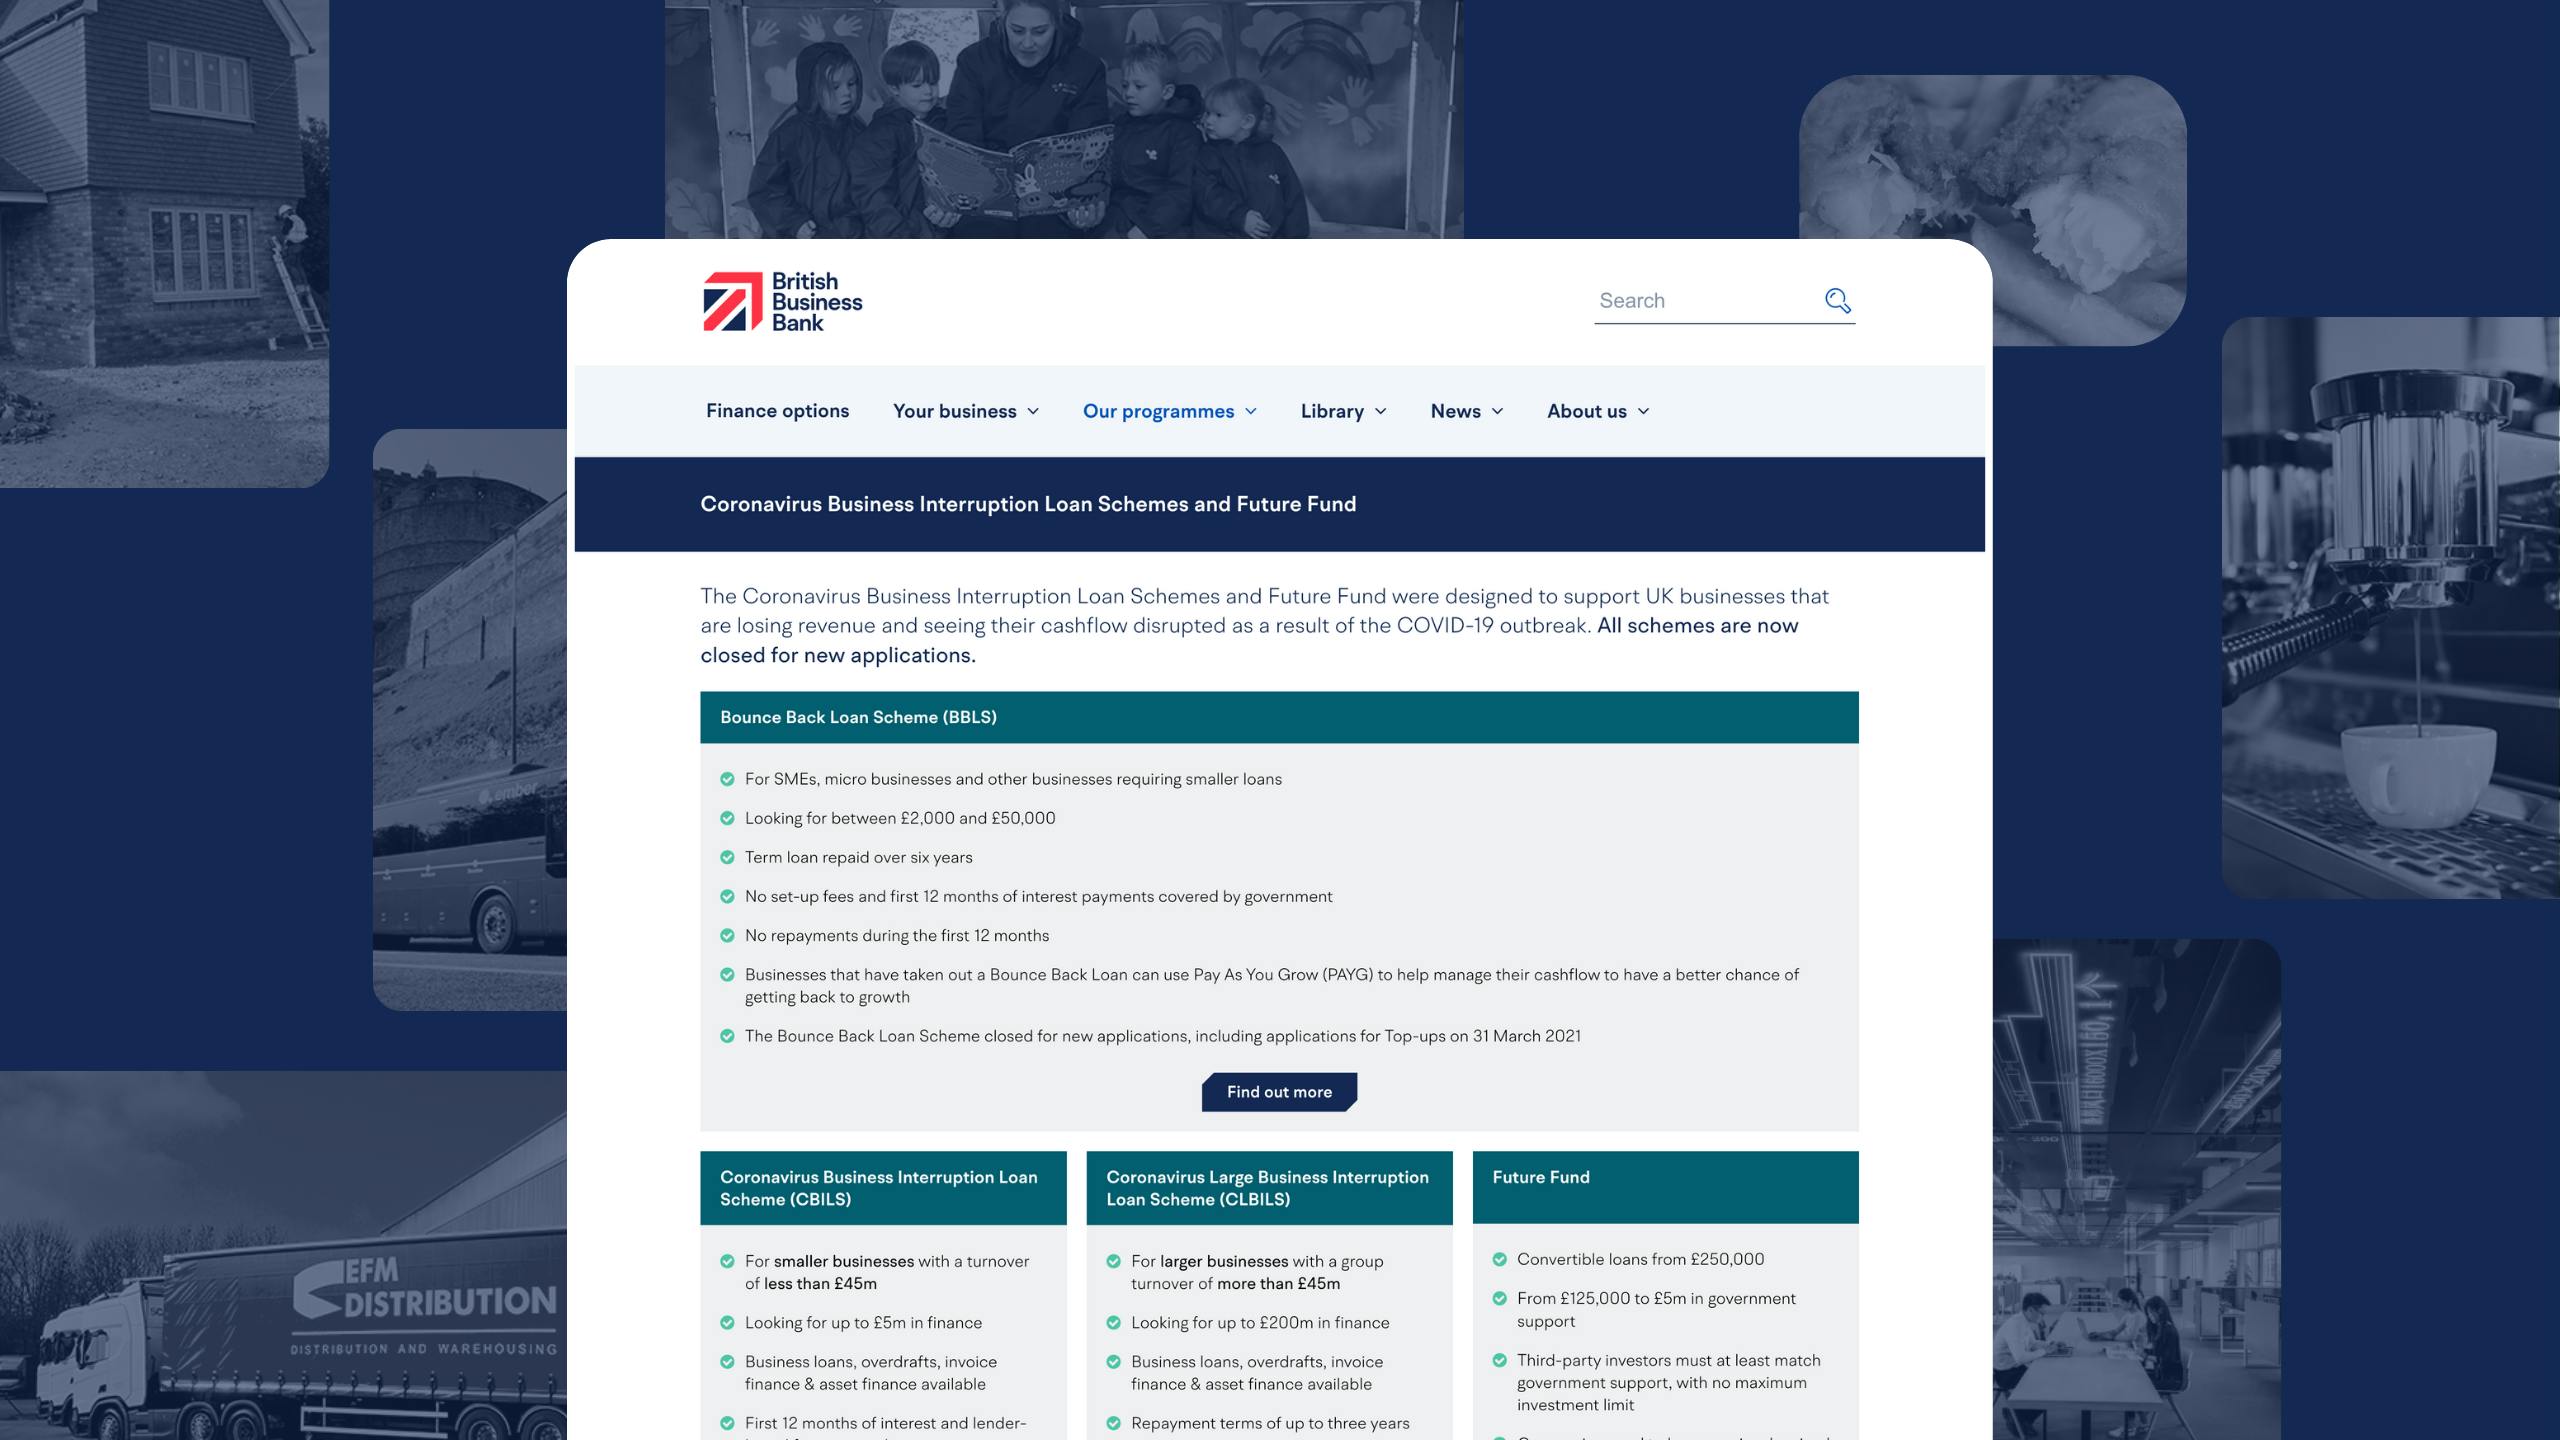 A screenshot of the British Business Bank's website opened to the "Coronavirus Business Interruption Loan Schemes and Future Fund" page.